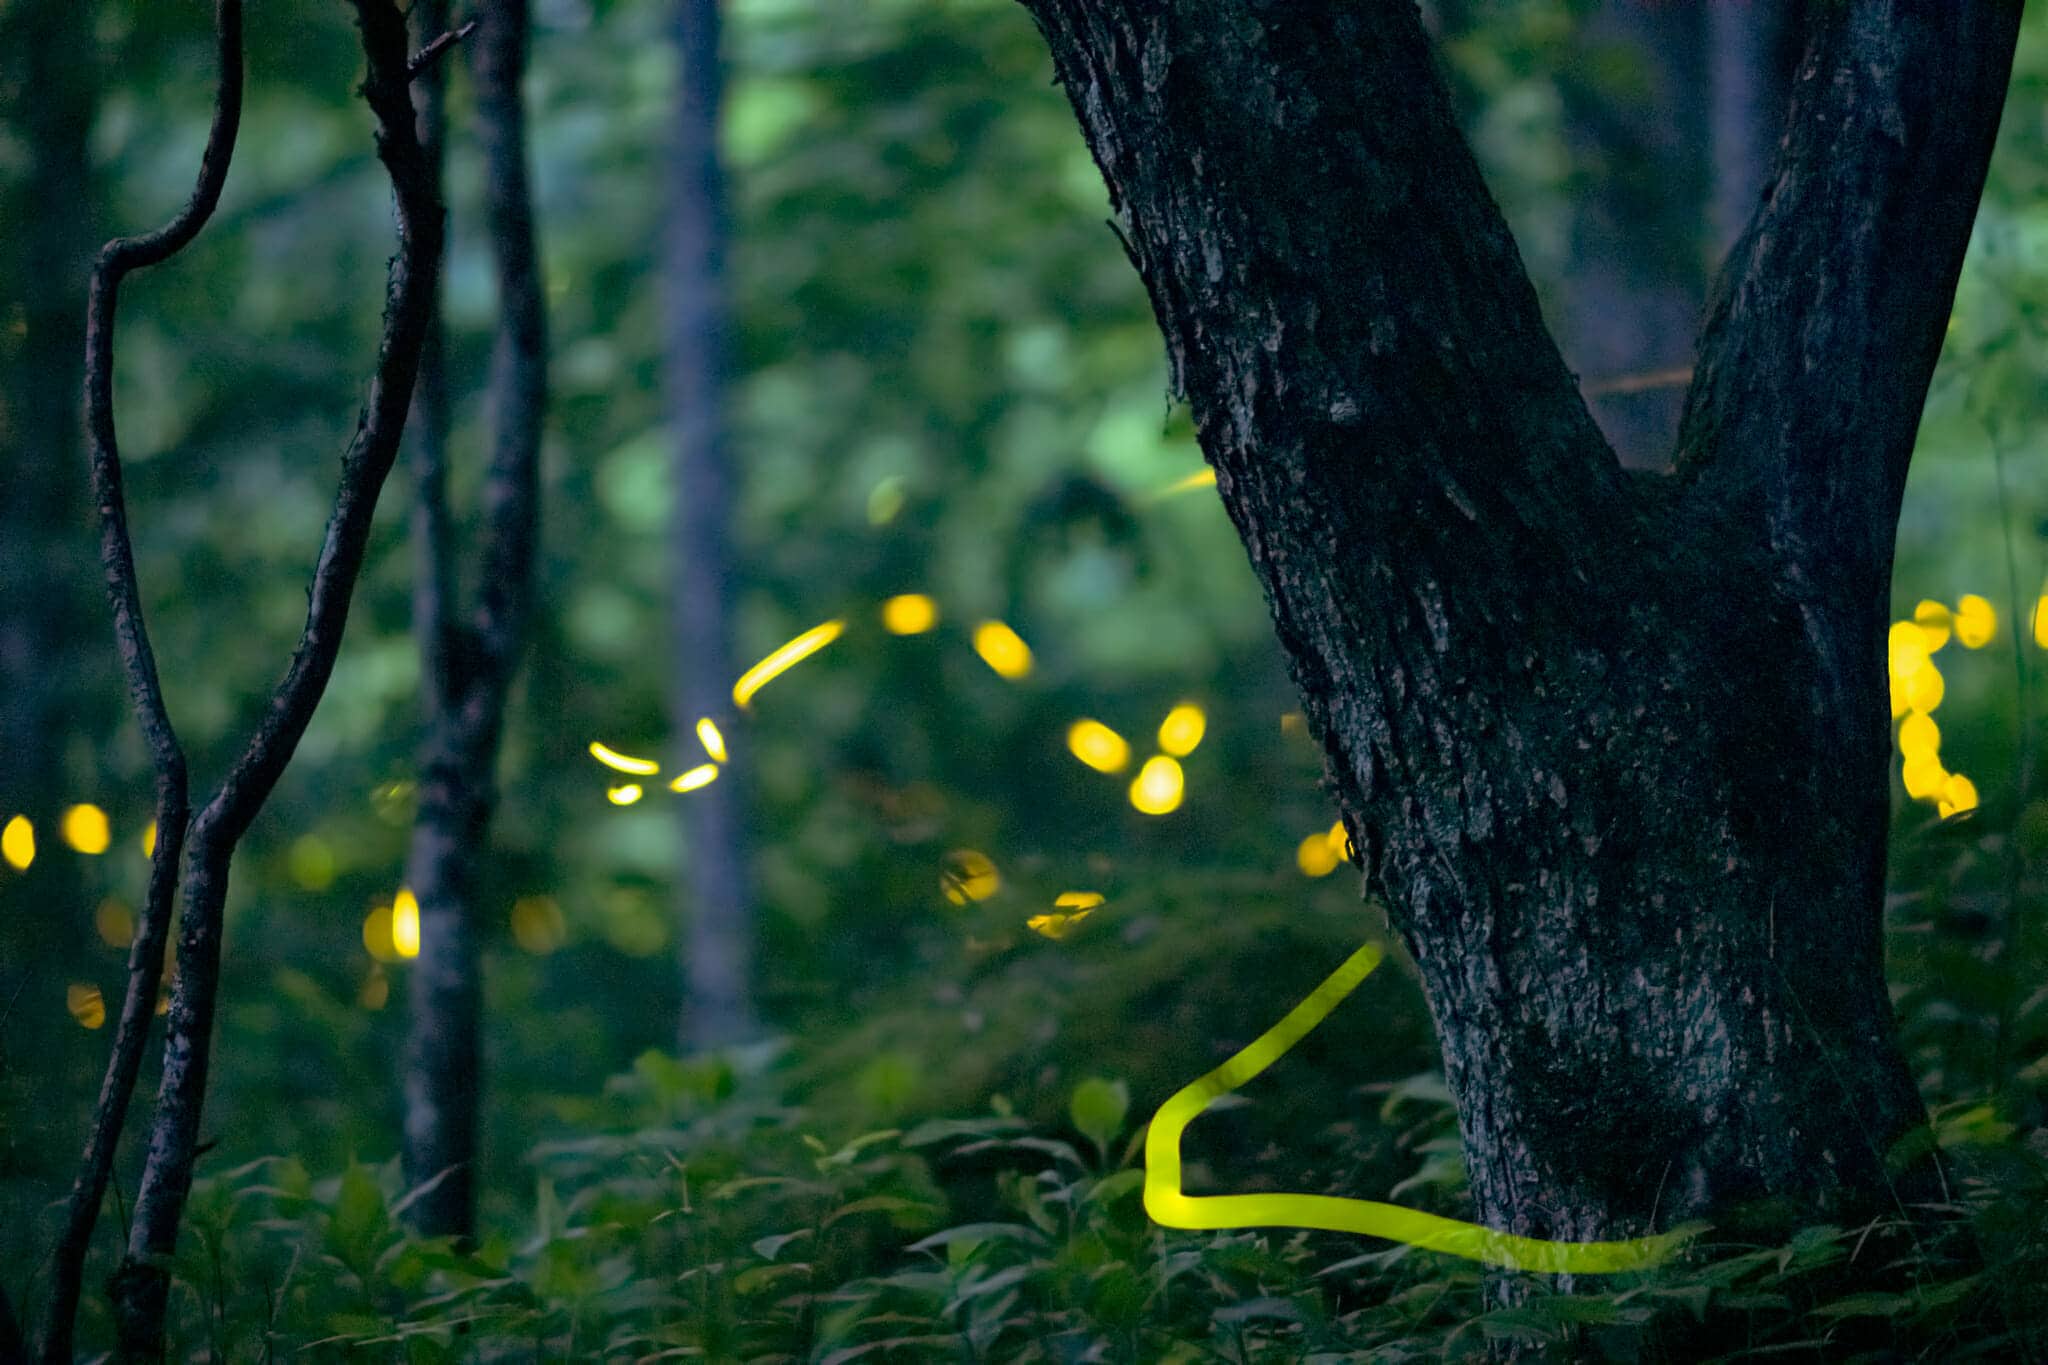 documenting the diminishing population of fireflies or lightning bugs